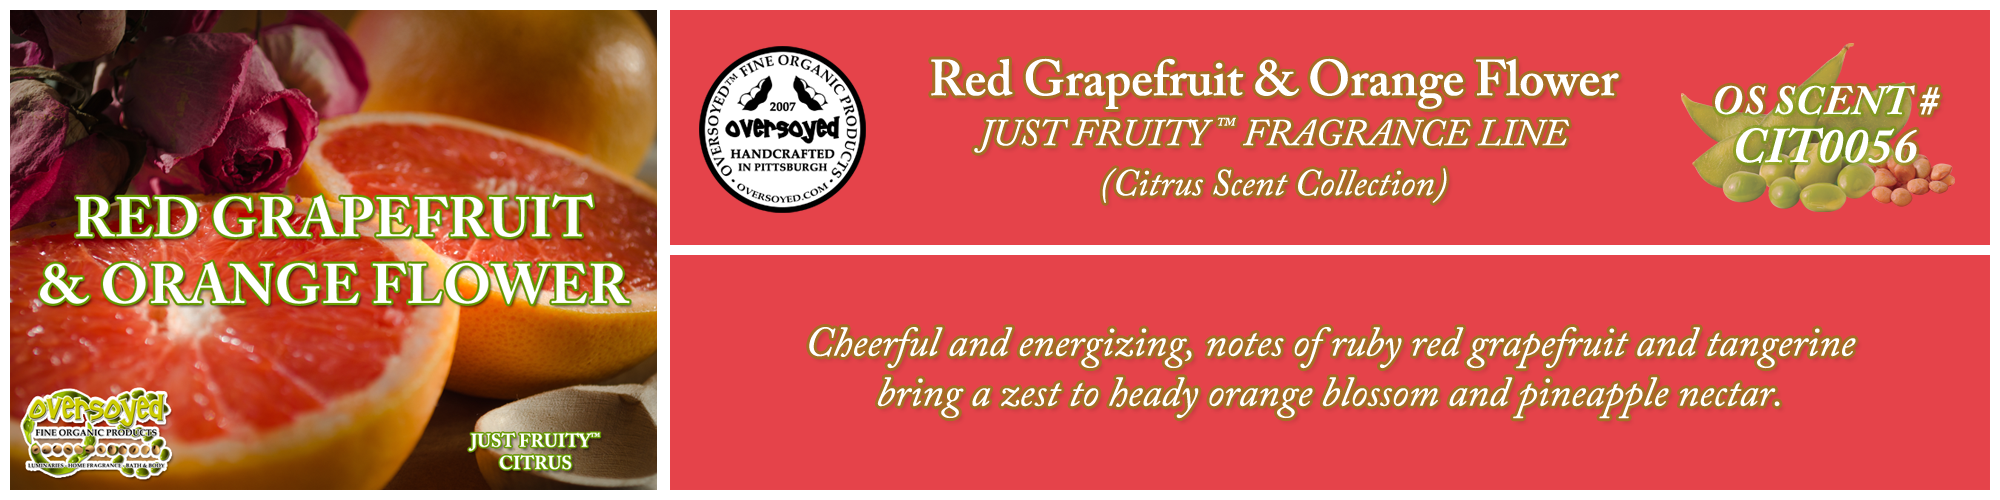 Red Grapefruit & Orange Flower Handcrafted Products Collection